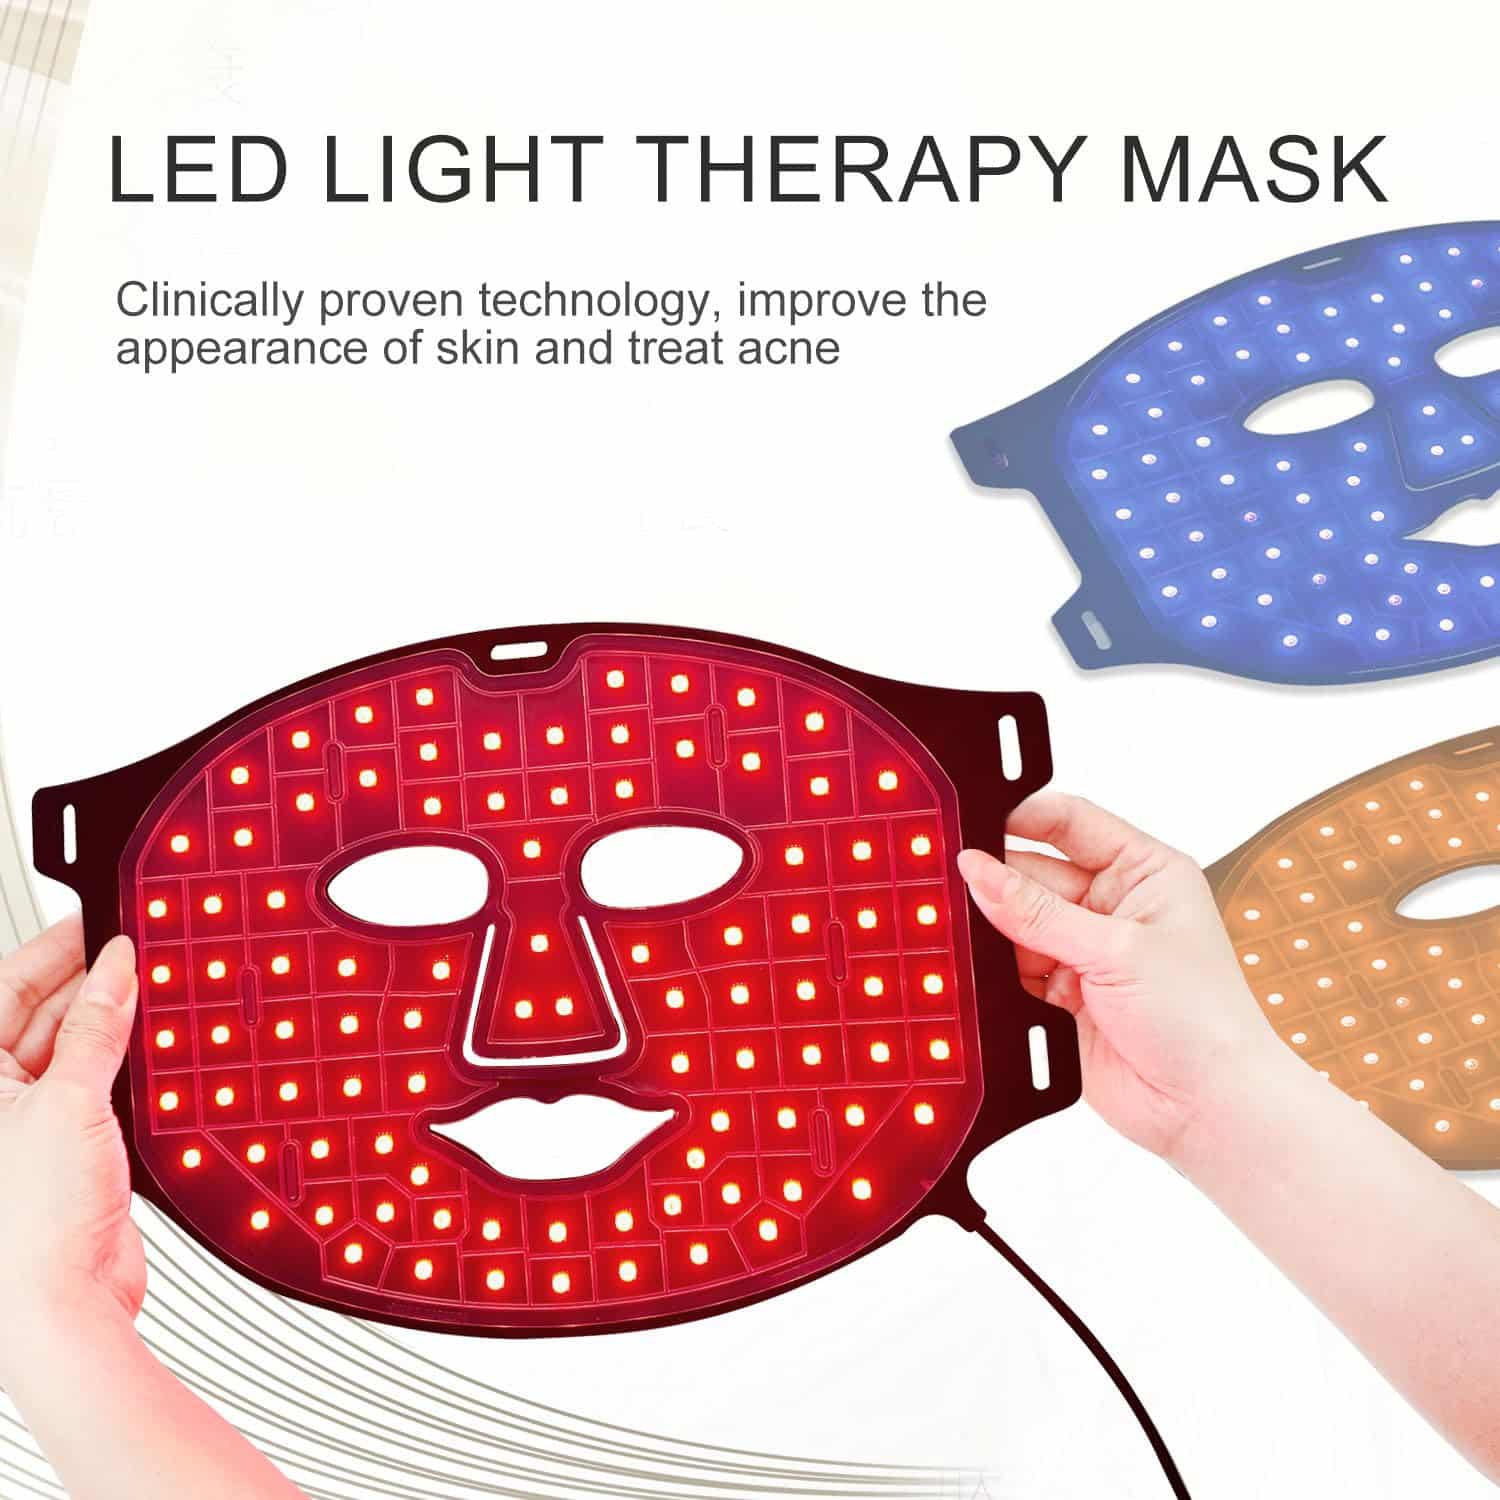 Avorla Beauty LED mask - Infrared light therapy led facial light Photons Facial Skin Care Wrinkle reduce anti-acne facial light